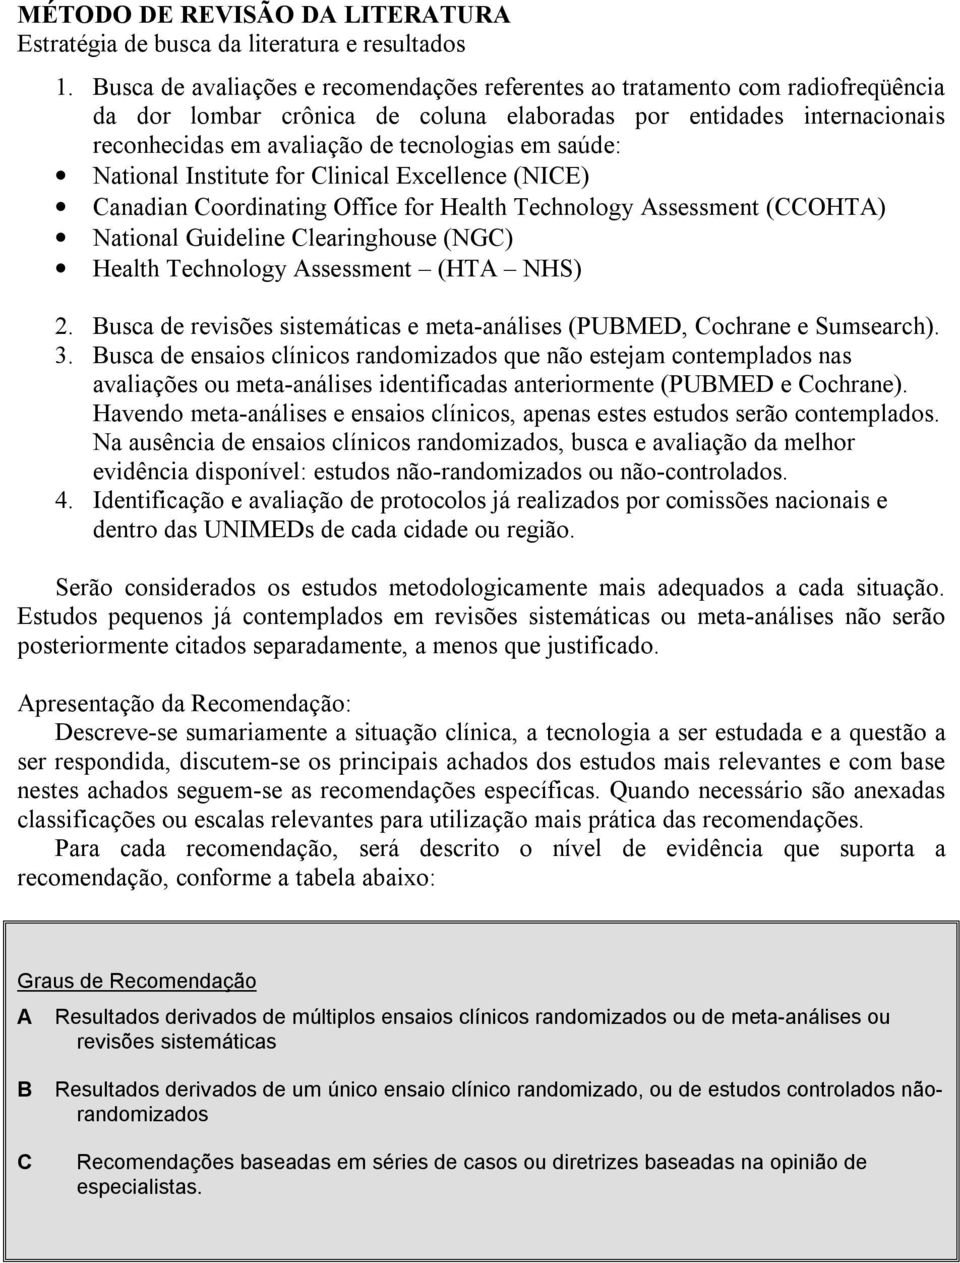 saúde: National Institute for Clinical Excellence (NICE) Canadian Coordinating Office for Health Technology Assessment (CCOHTA) National Guideline Clearinghouse (NGC) Health Technology Assessment